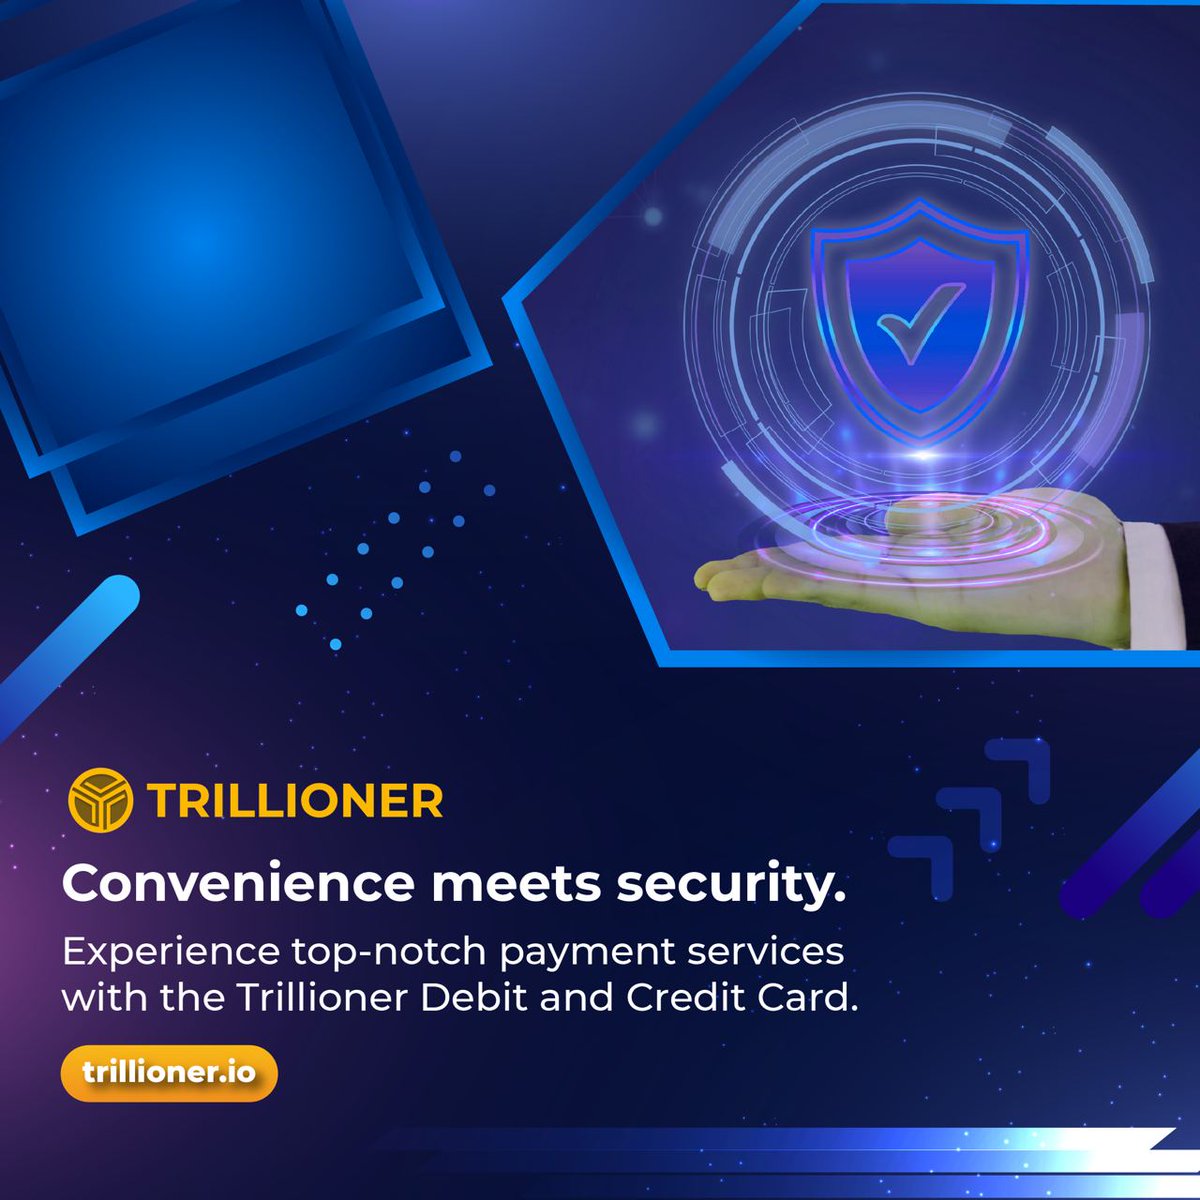 Convenience meets security. Experience top-notch payment services with the Trillioner Debit and Credit Card. 

#TLC #Trillioner #cryptocurrency #cryptonews #cryptotrading #Blockchain #metaverse #blockchainnews #BlockchainInnovation